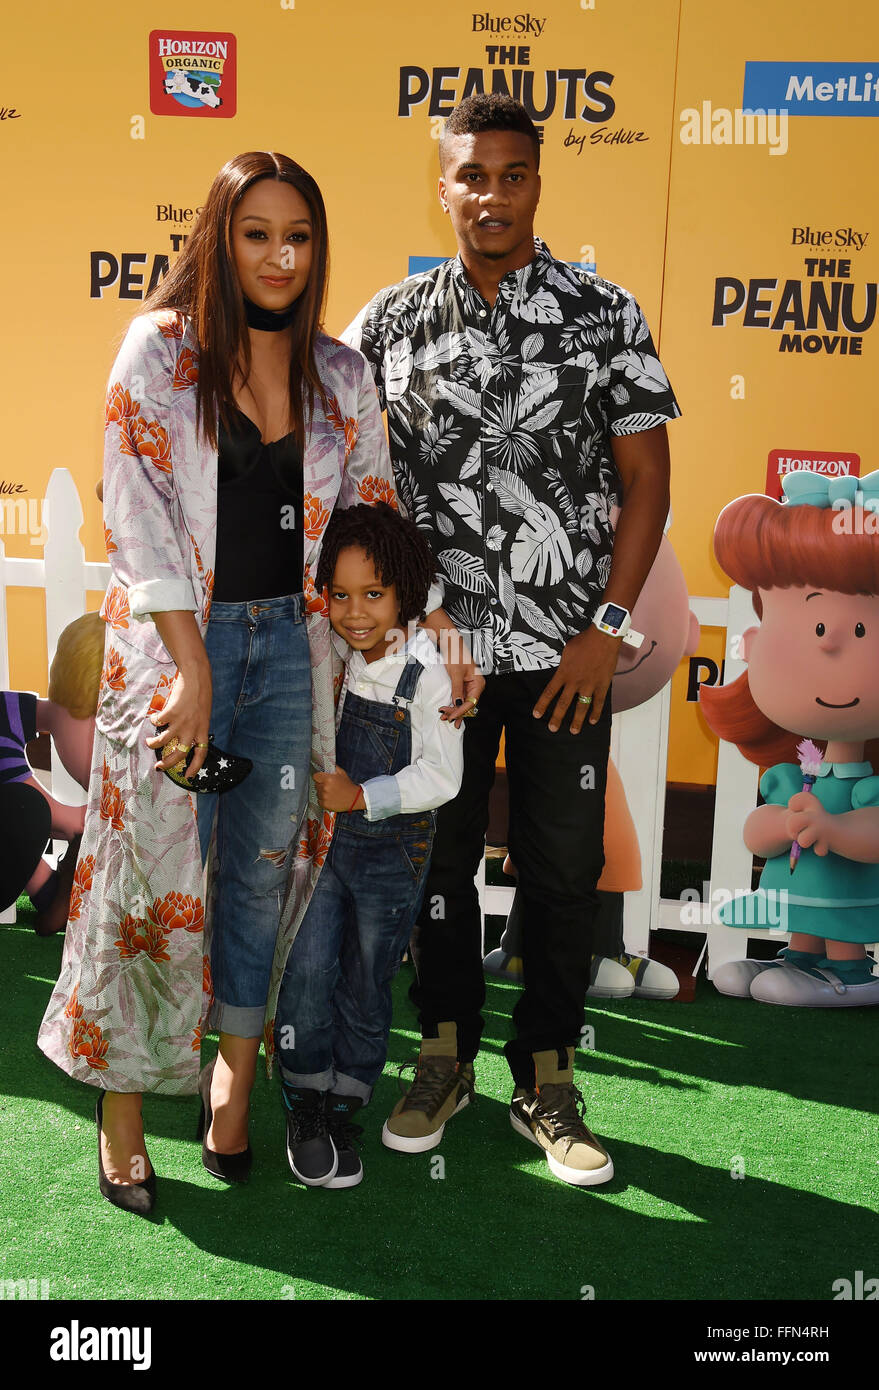 Actress Tia Mowry, son Cree Taylor Hardrict and husband Cory Hardrict attend the Premiere of 20th Century Fox's 'The Peanuts Movie' at the Regency Village Theatre on November 1, 2015 in Westwood, California., Stock Photo